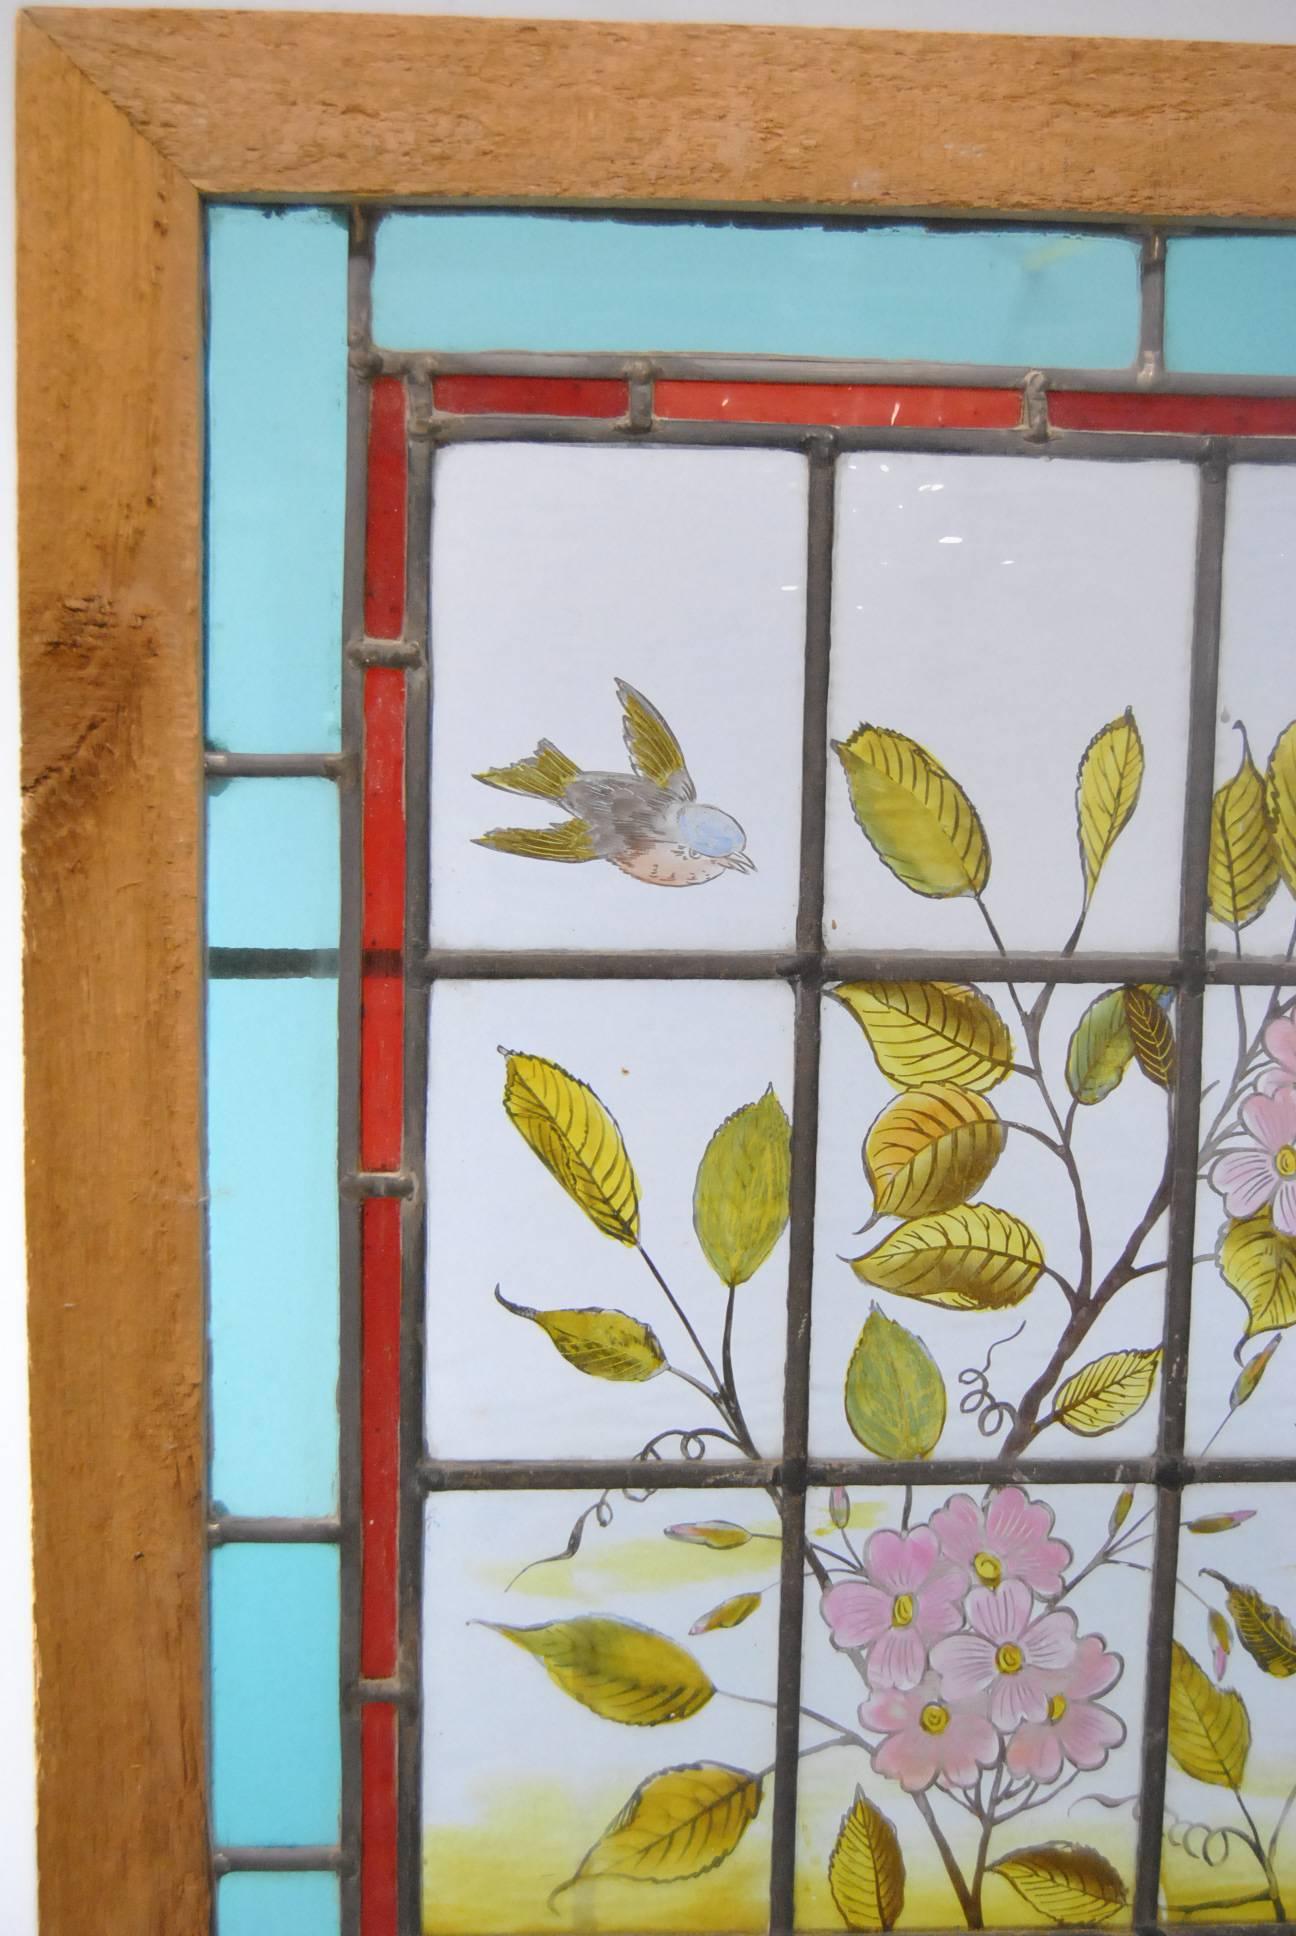 American Victorian Hand-Painted Stained Glass Window with Swallows and Dogwood Blossoms